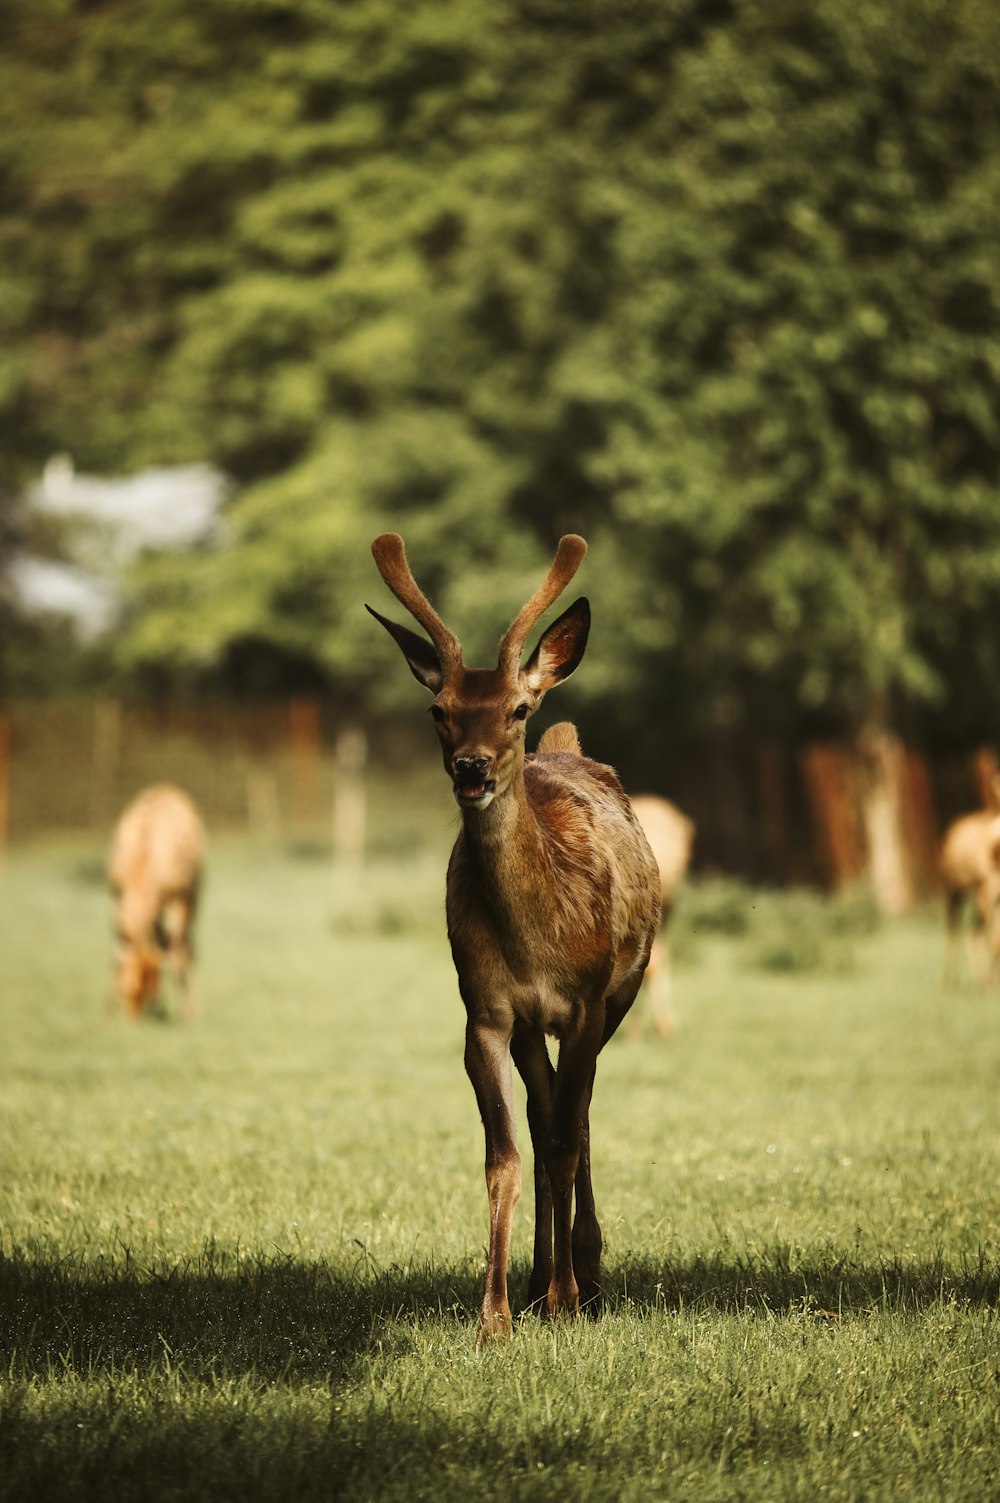 a deer standing in the grass with other deer in the background